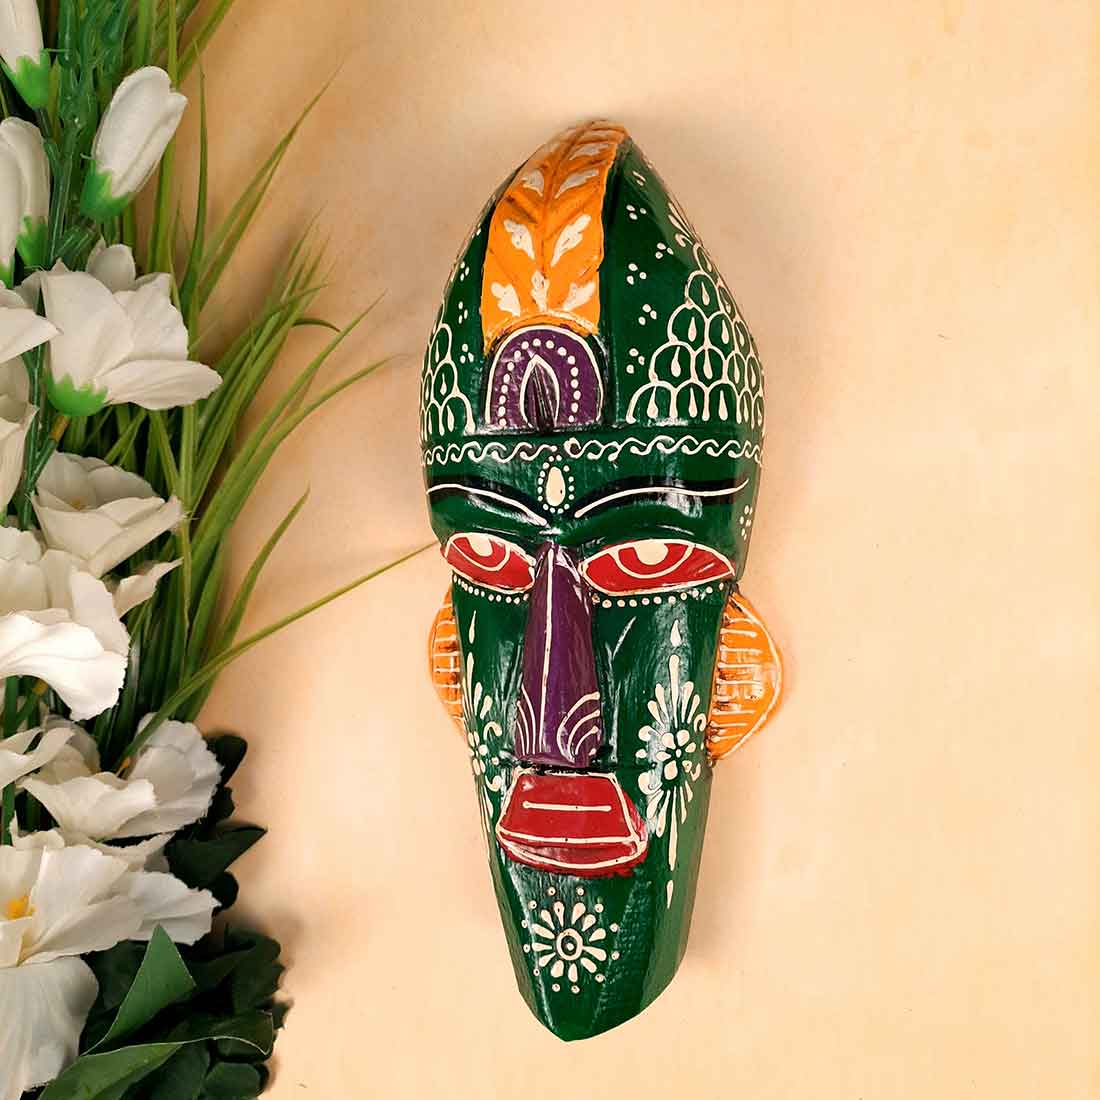 Wall Hanging Egyptian Decorative showpiece - for Room Decor & Gifts - 12 Inch